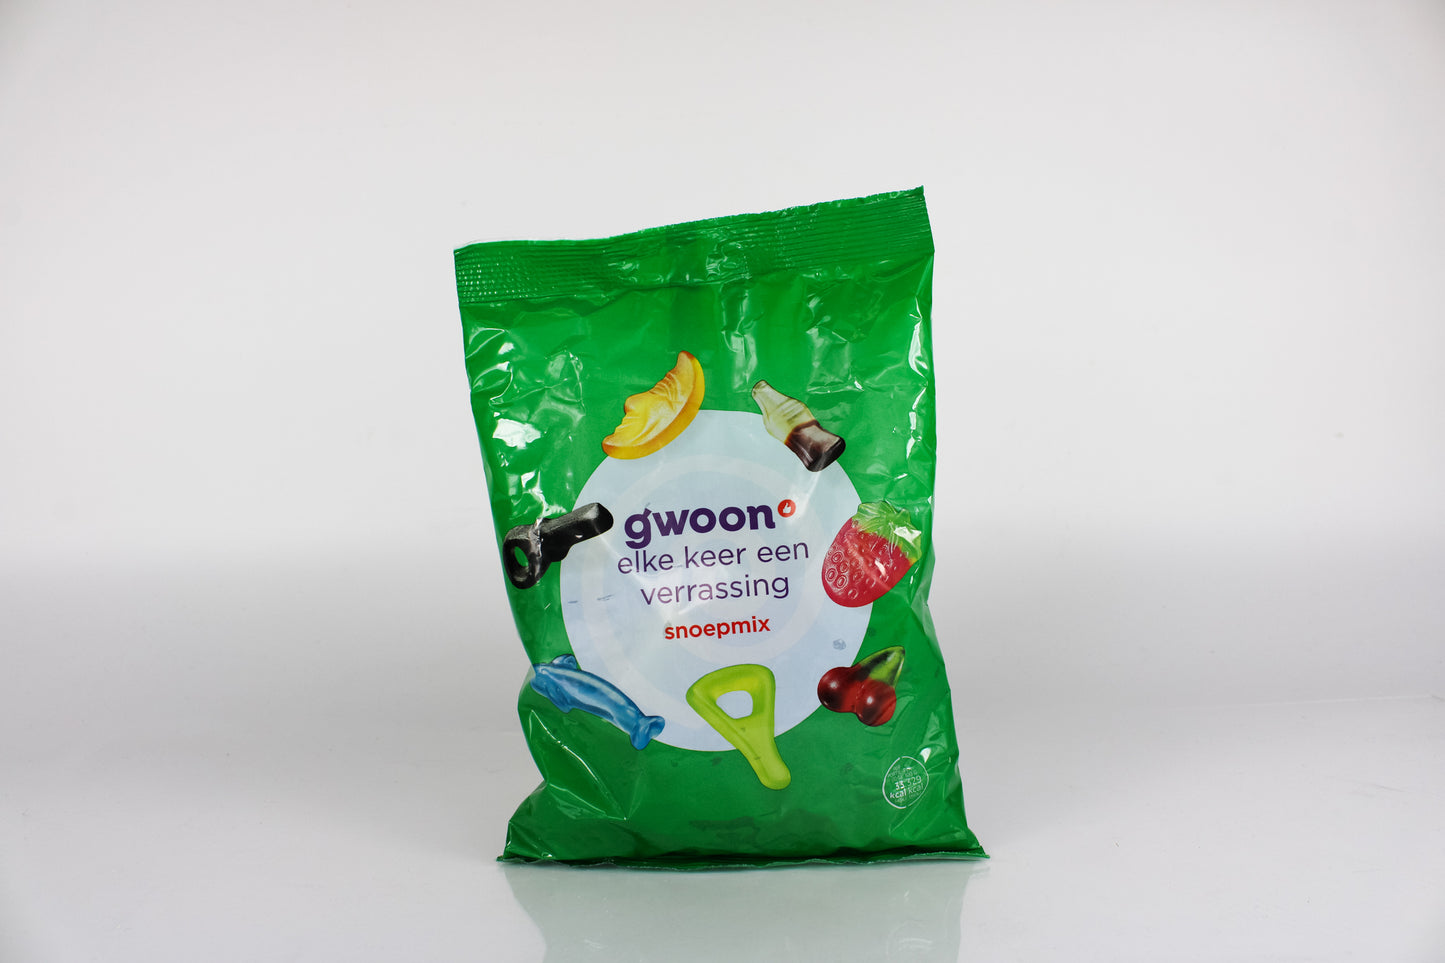 Gwoon Mixed Surprise candy Bag 400g